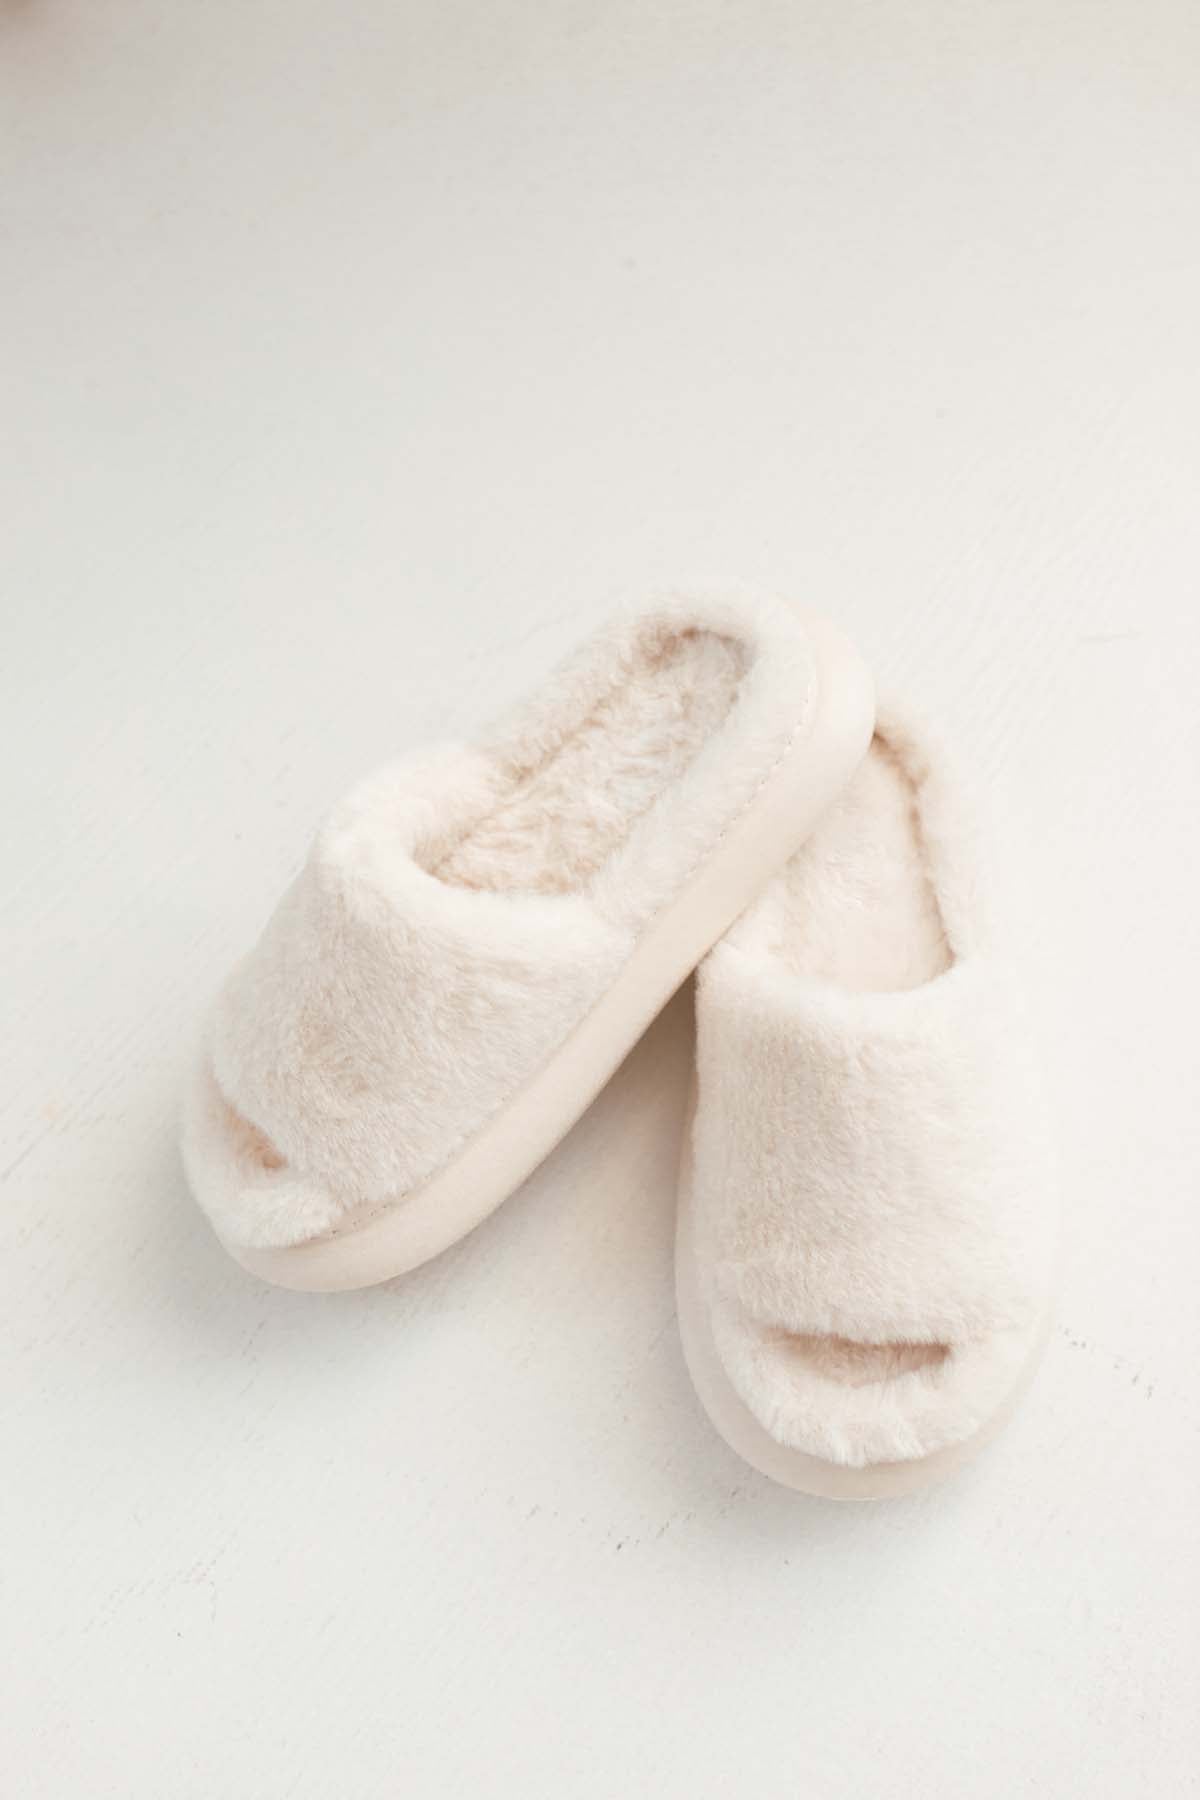 Cozy Slippers, alternate, color, Ivory